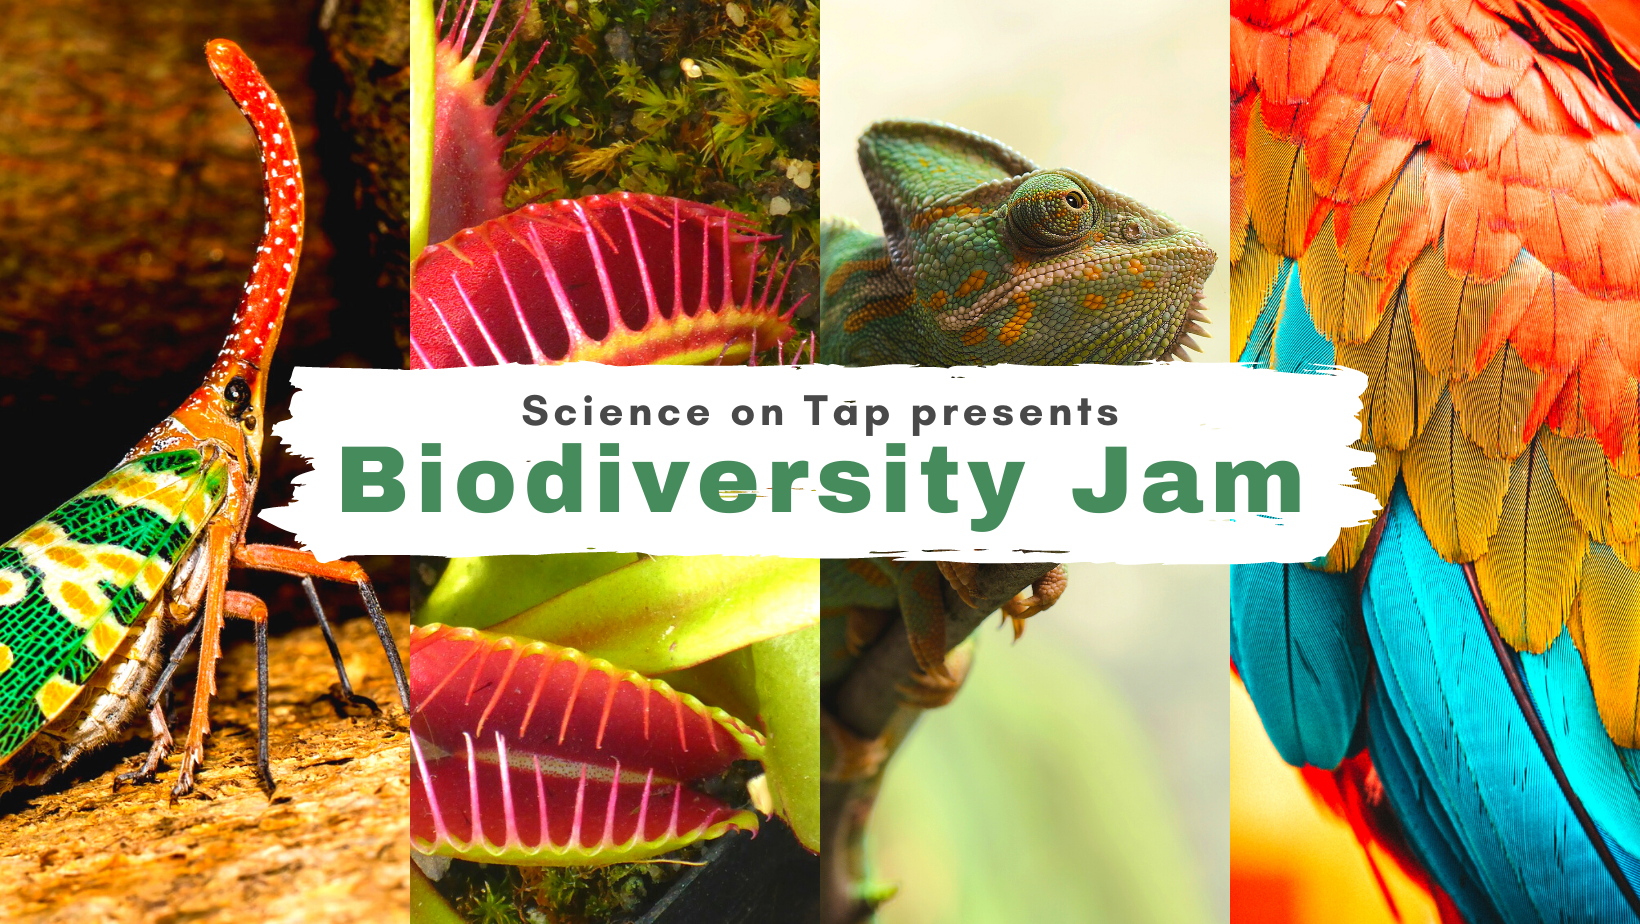 Four panels of photos (an insect, Venus flytrap, chameleon, and parrot) with the words "Science on Tap presents Biodiversity Jam"